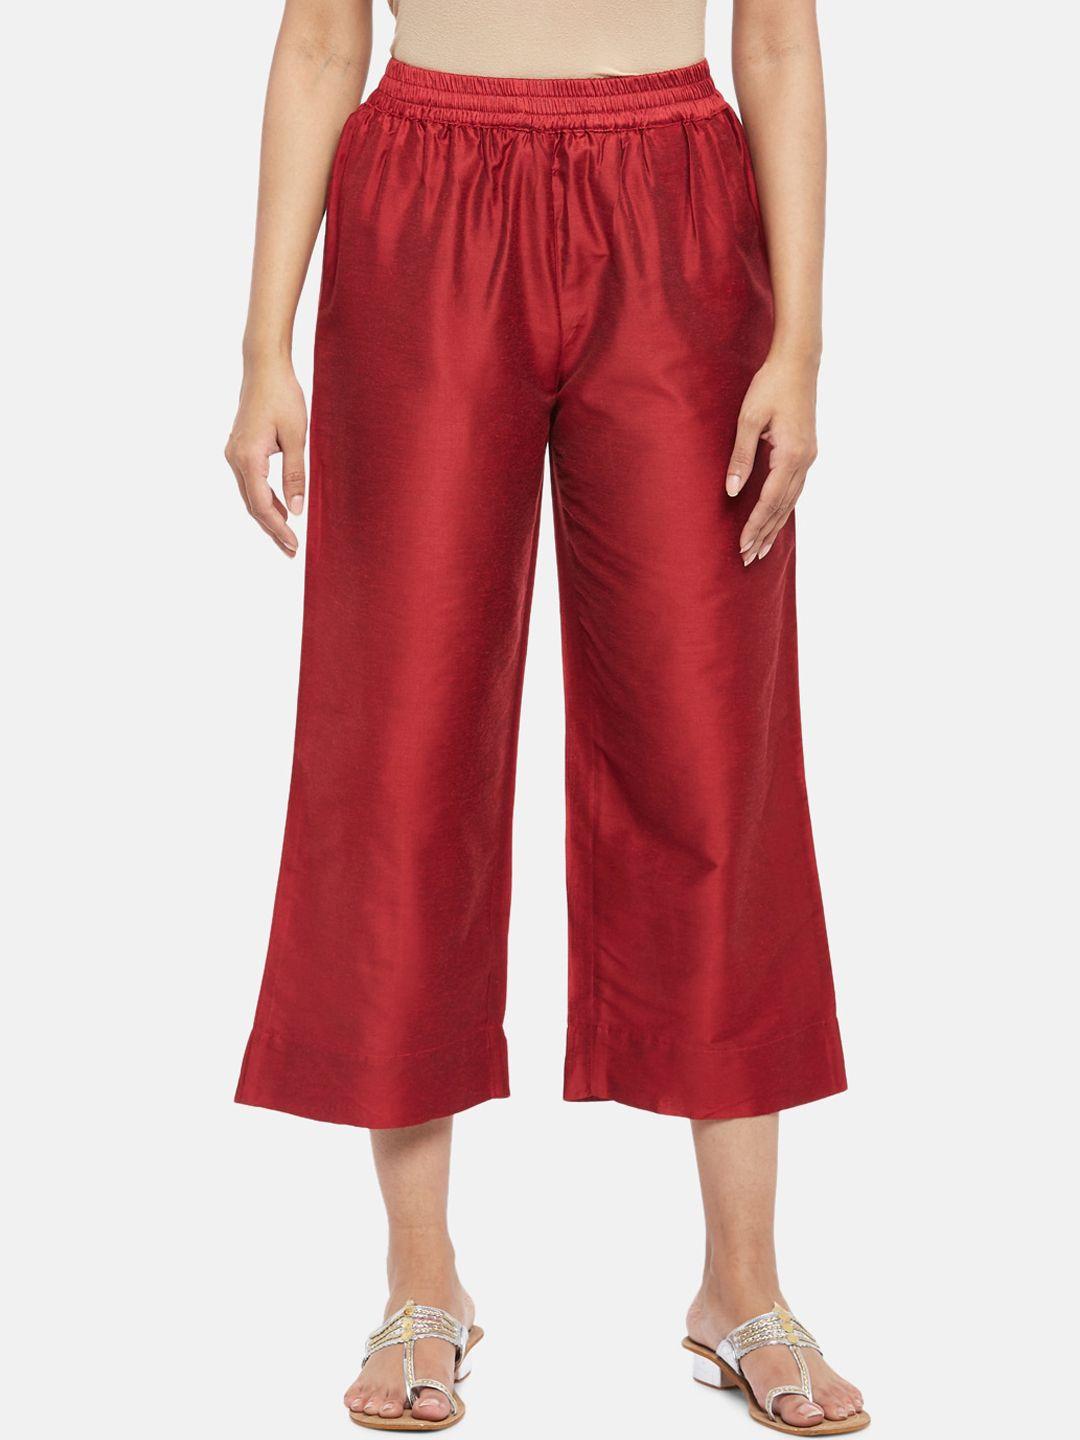 rangmanch by pantaloons women red culottes trousers